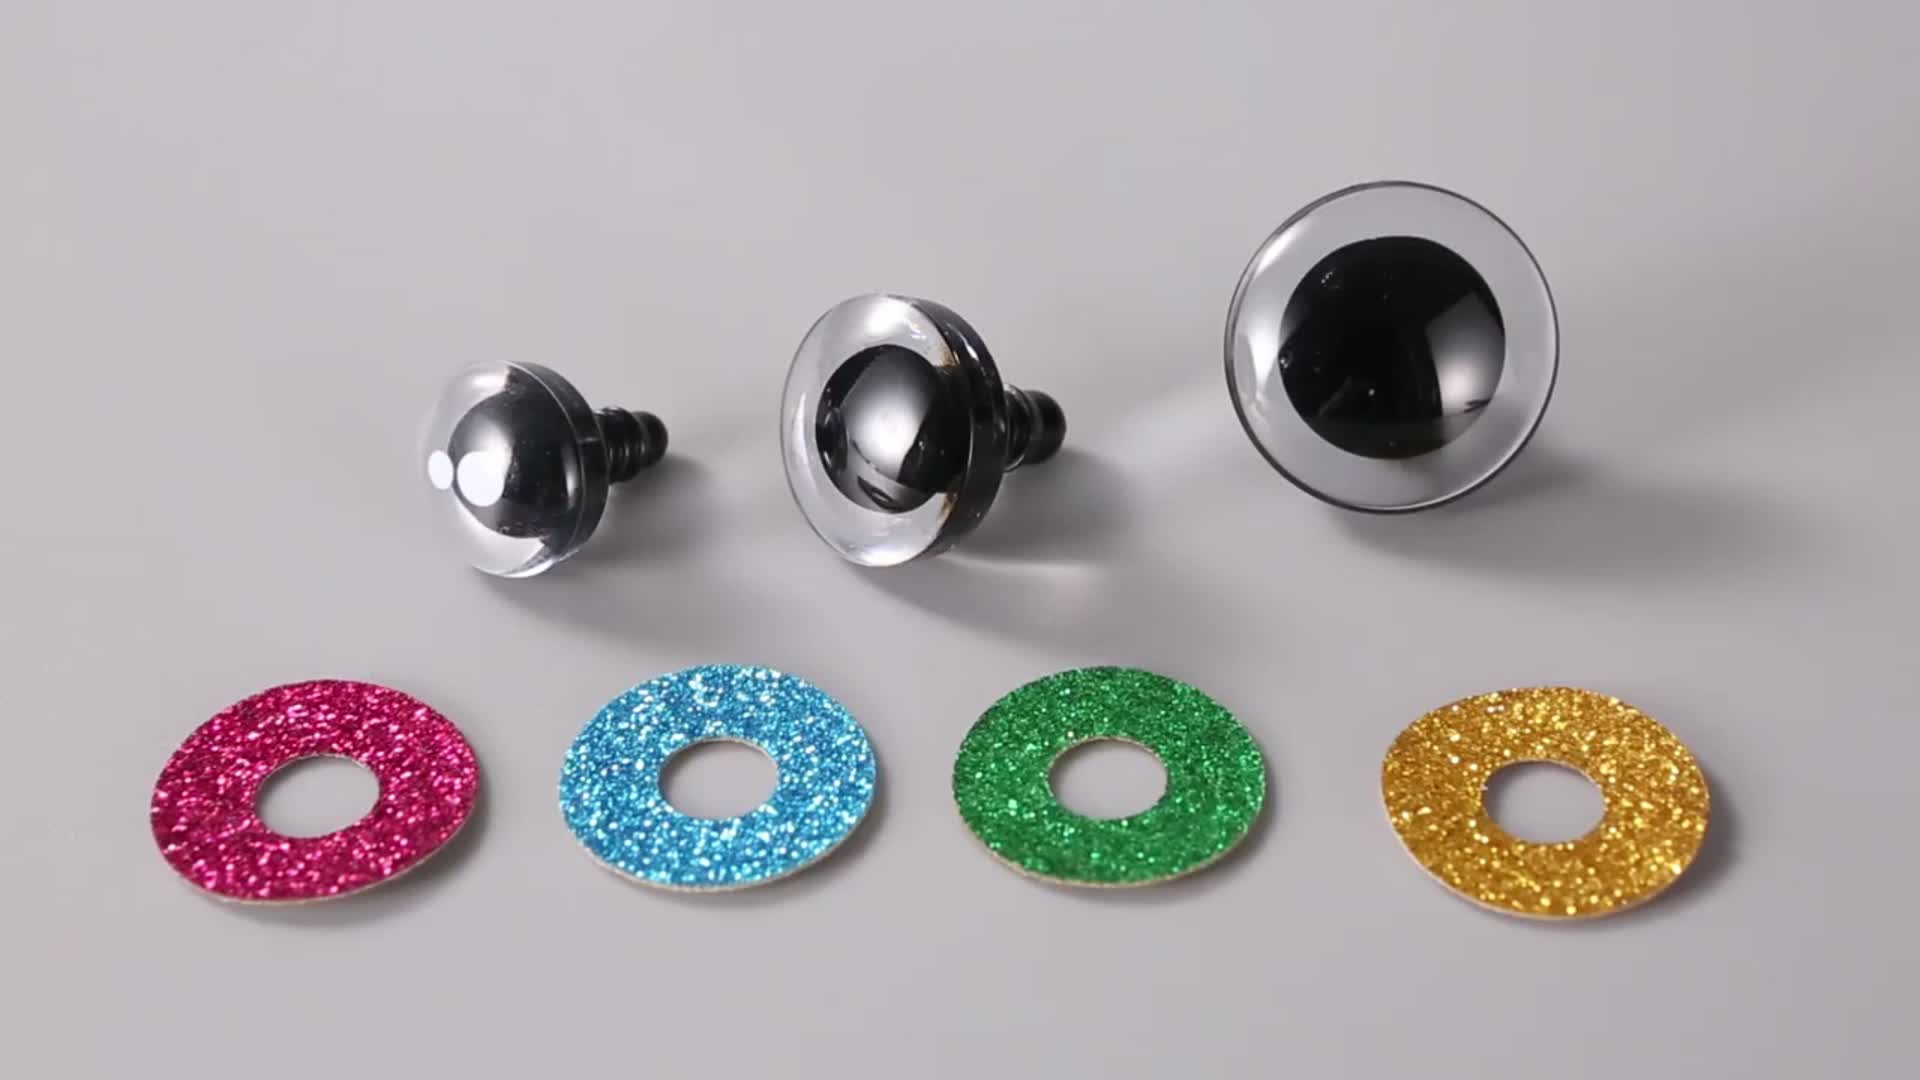 Doll House Accessories DESIGN 12mm14 16 18 20 25 30mm Cartoon 3D Glitter  Toy Safety Eyes Doll Pupil Eyes With Hard Washer D12 231023 From Men08,  $25.34